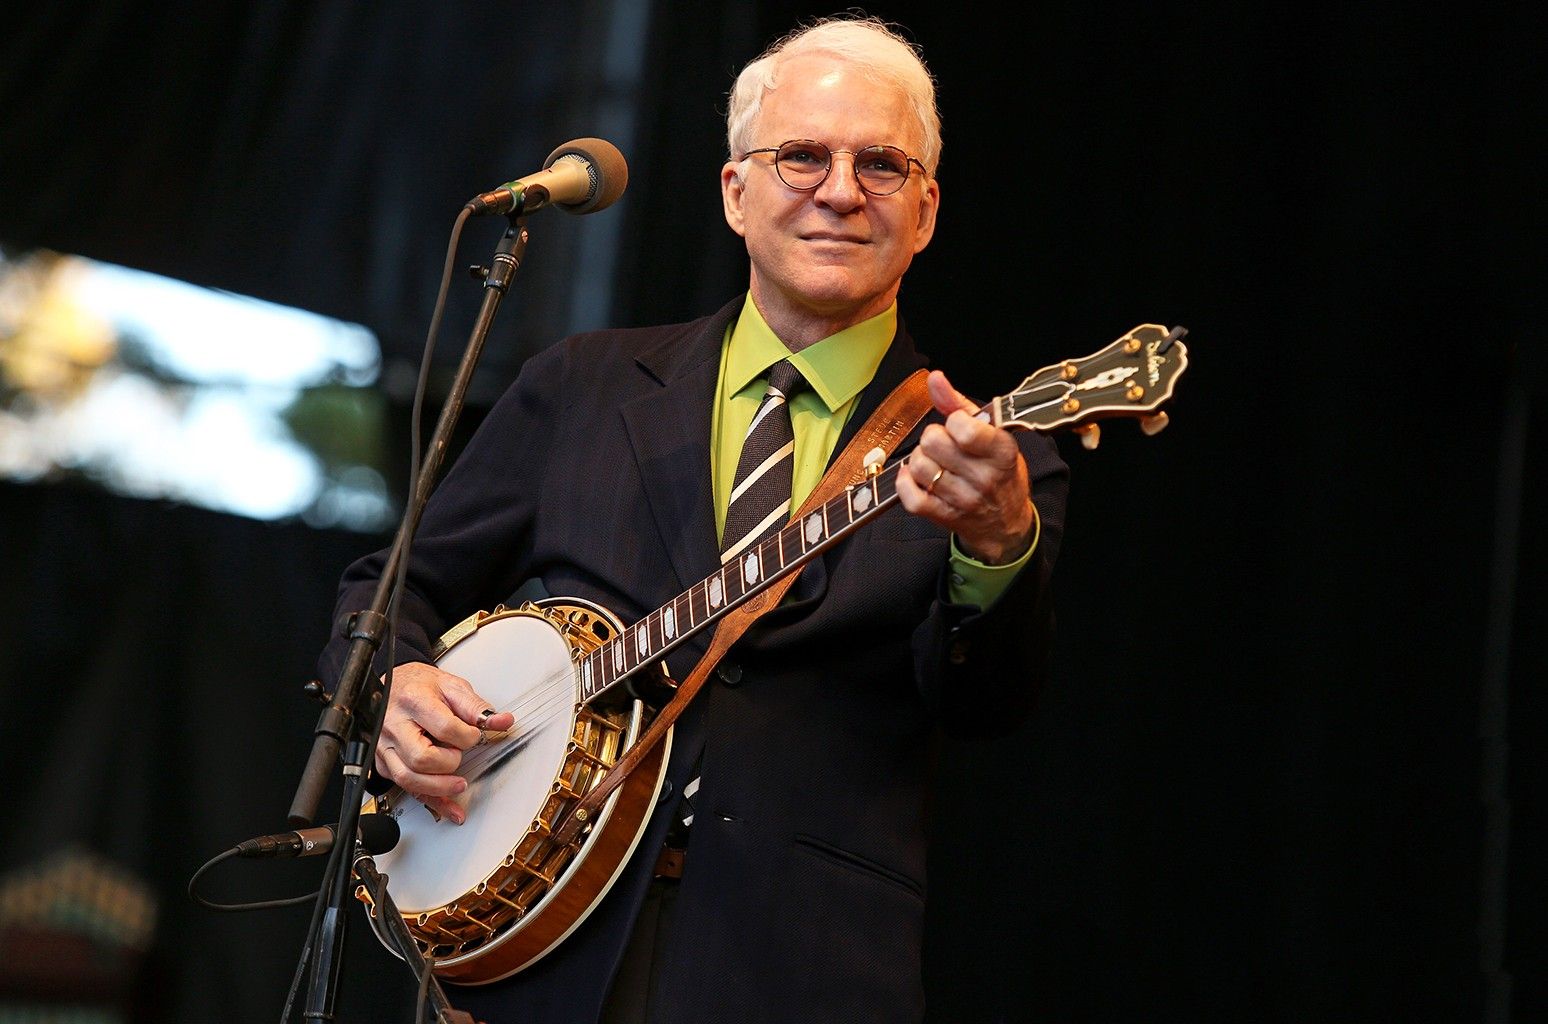 Who is Steve Martin? Net worth, wives, family, and more